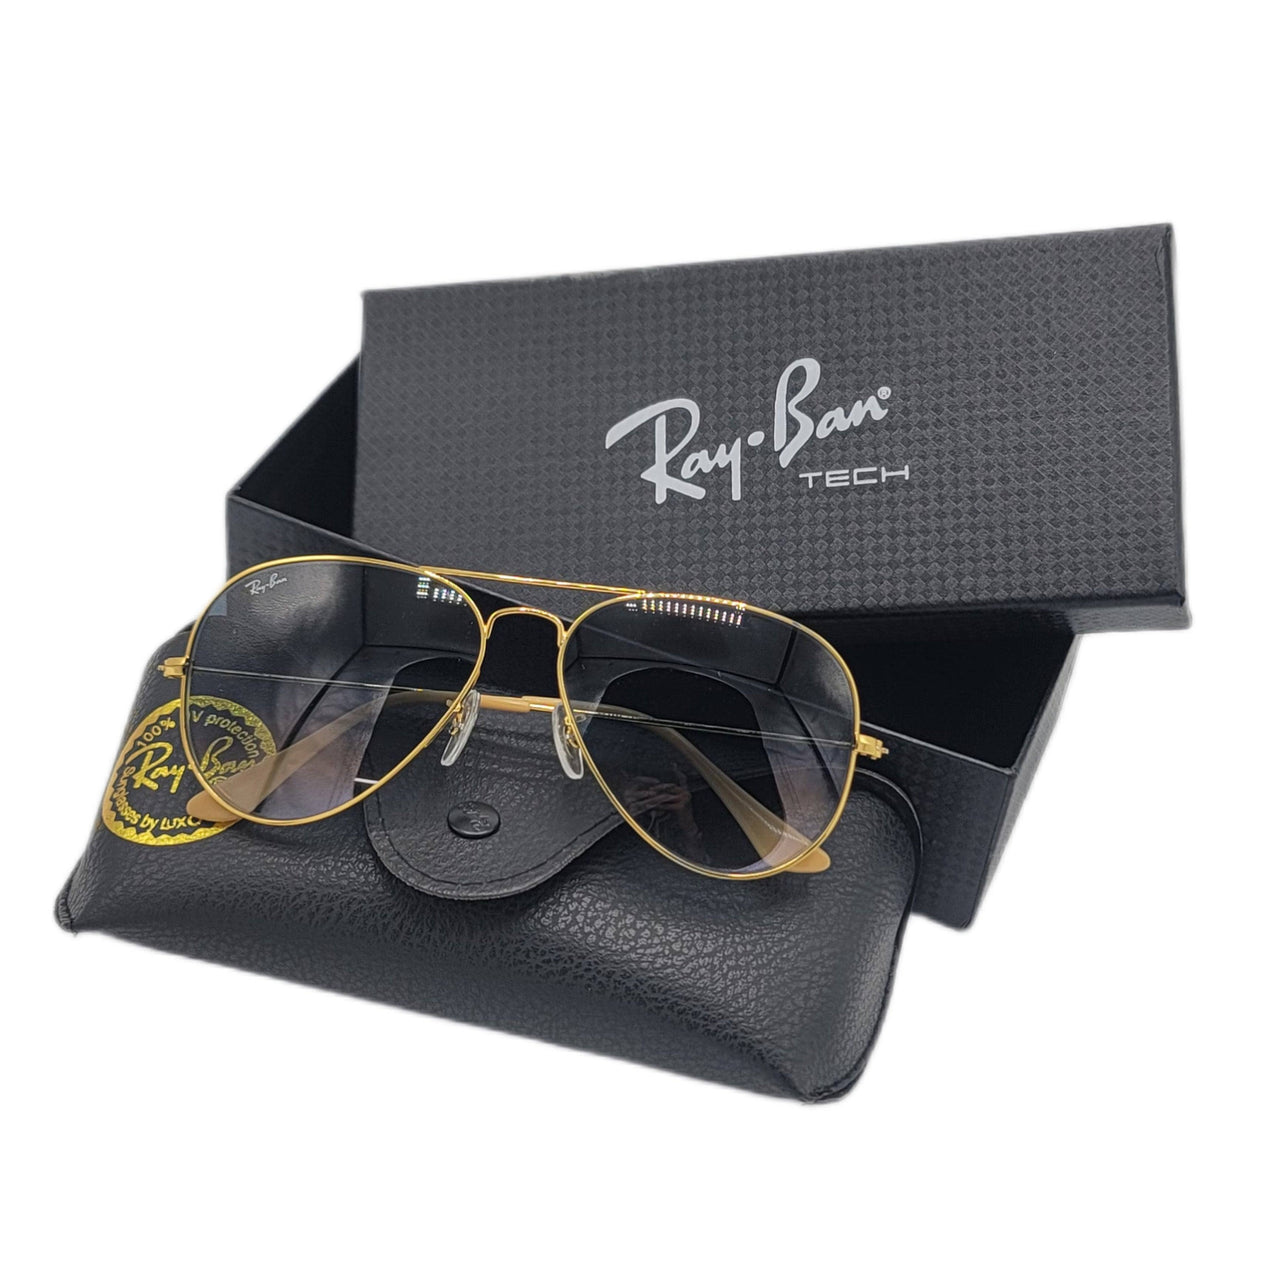 The Bag Couture Sunglasses Ray Ban Aviator Sunglasses GBL